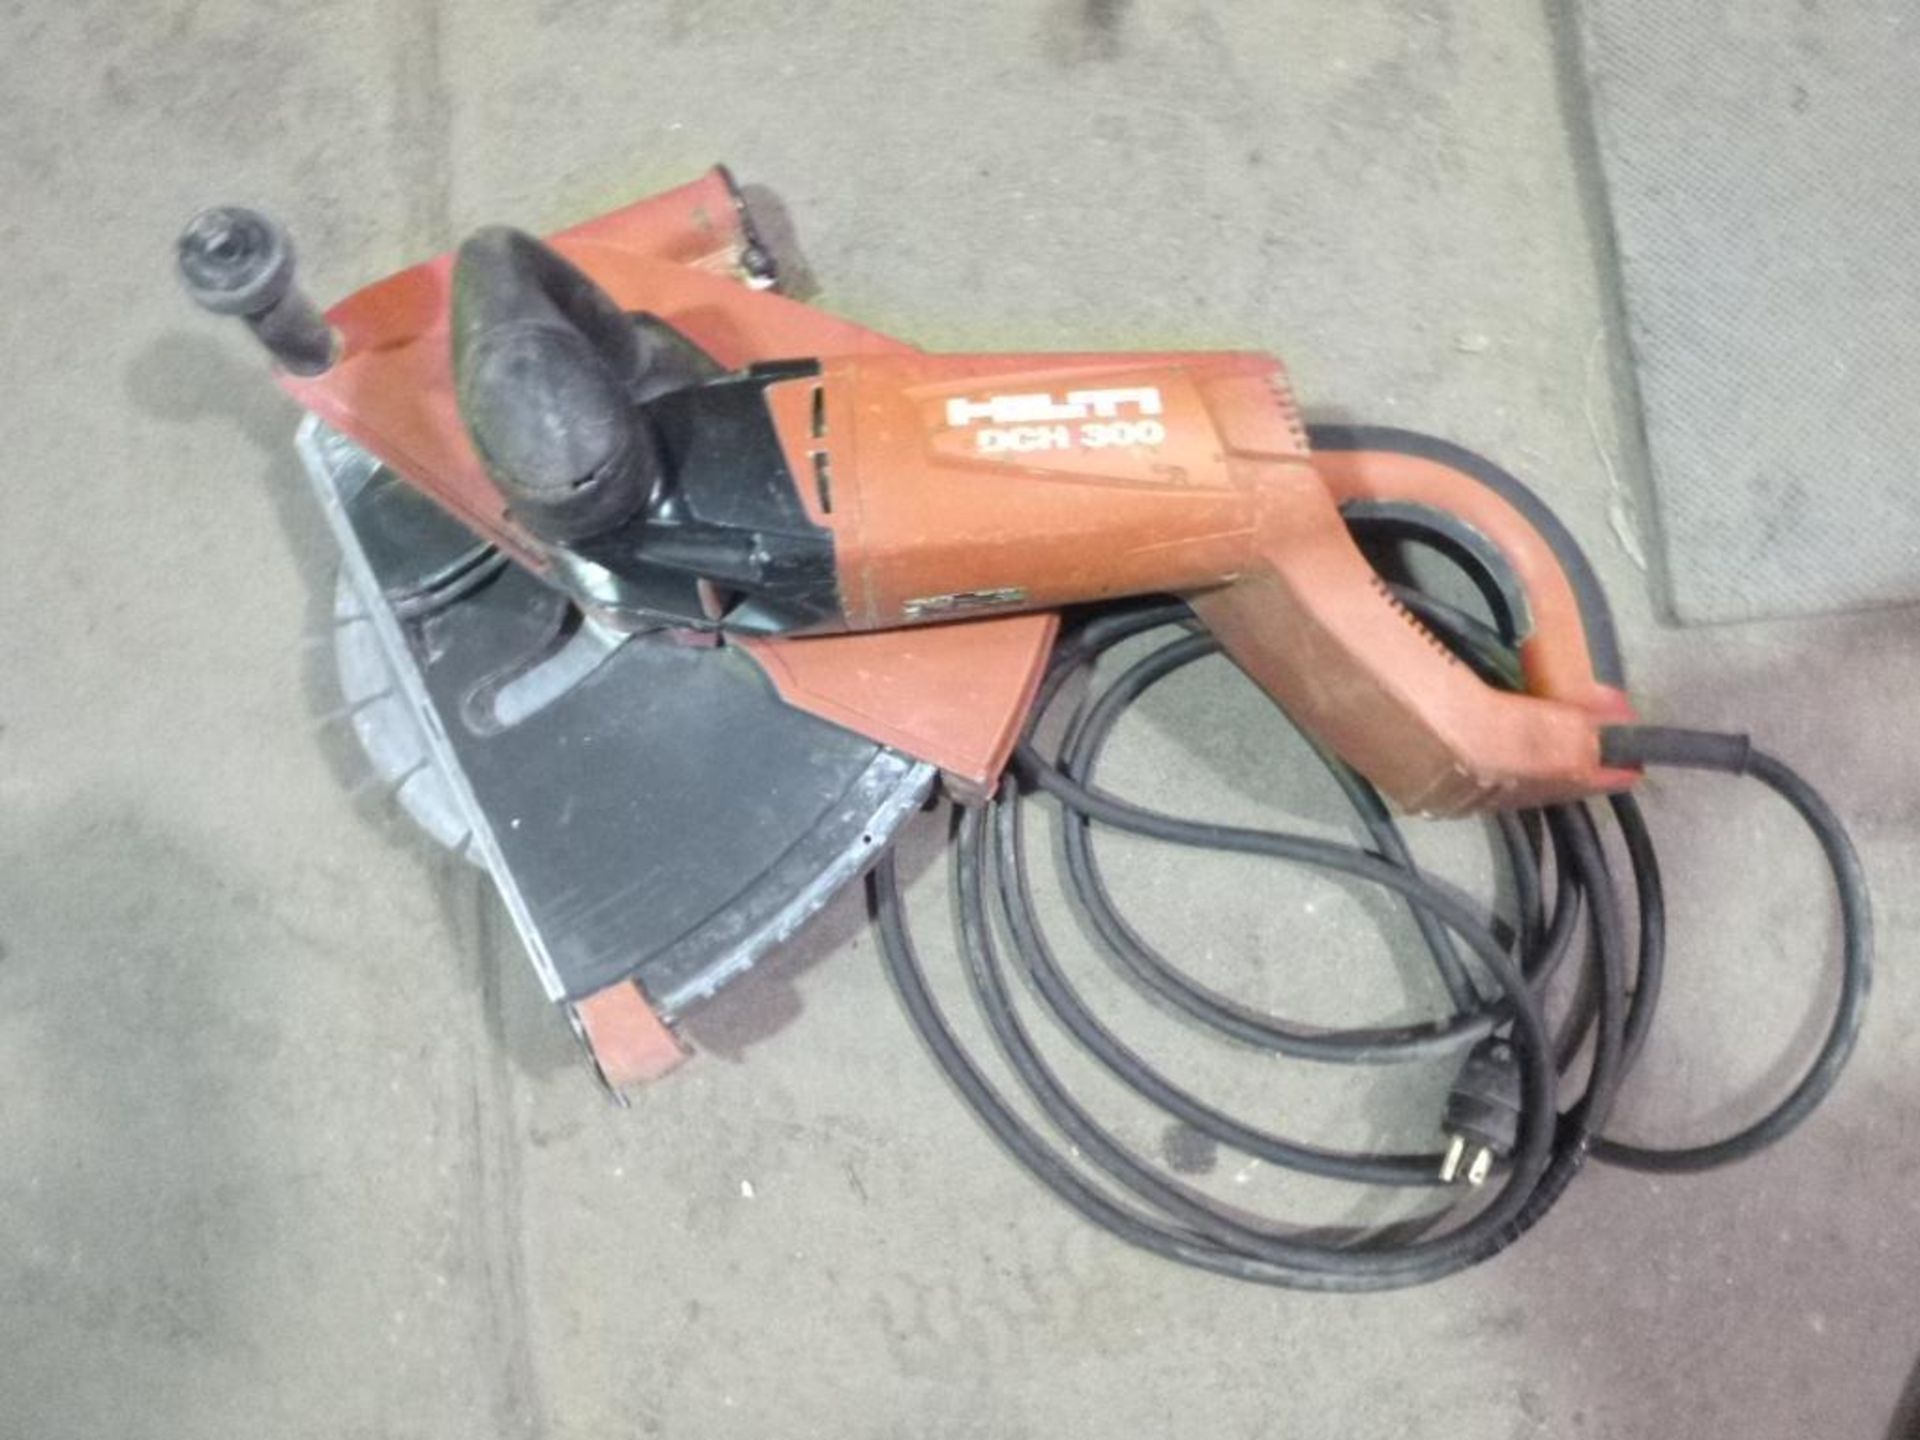 Hilti DCH300-01 Electric Saw Cut-Off, 12 in. - Image 2 of 2